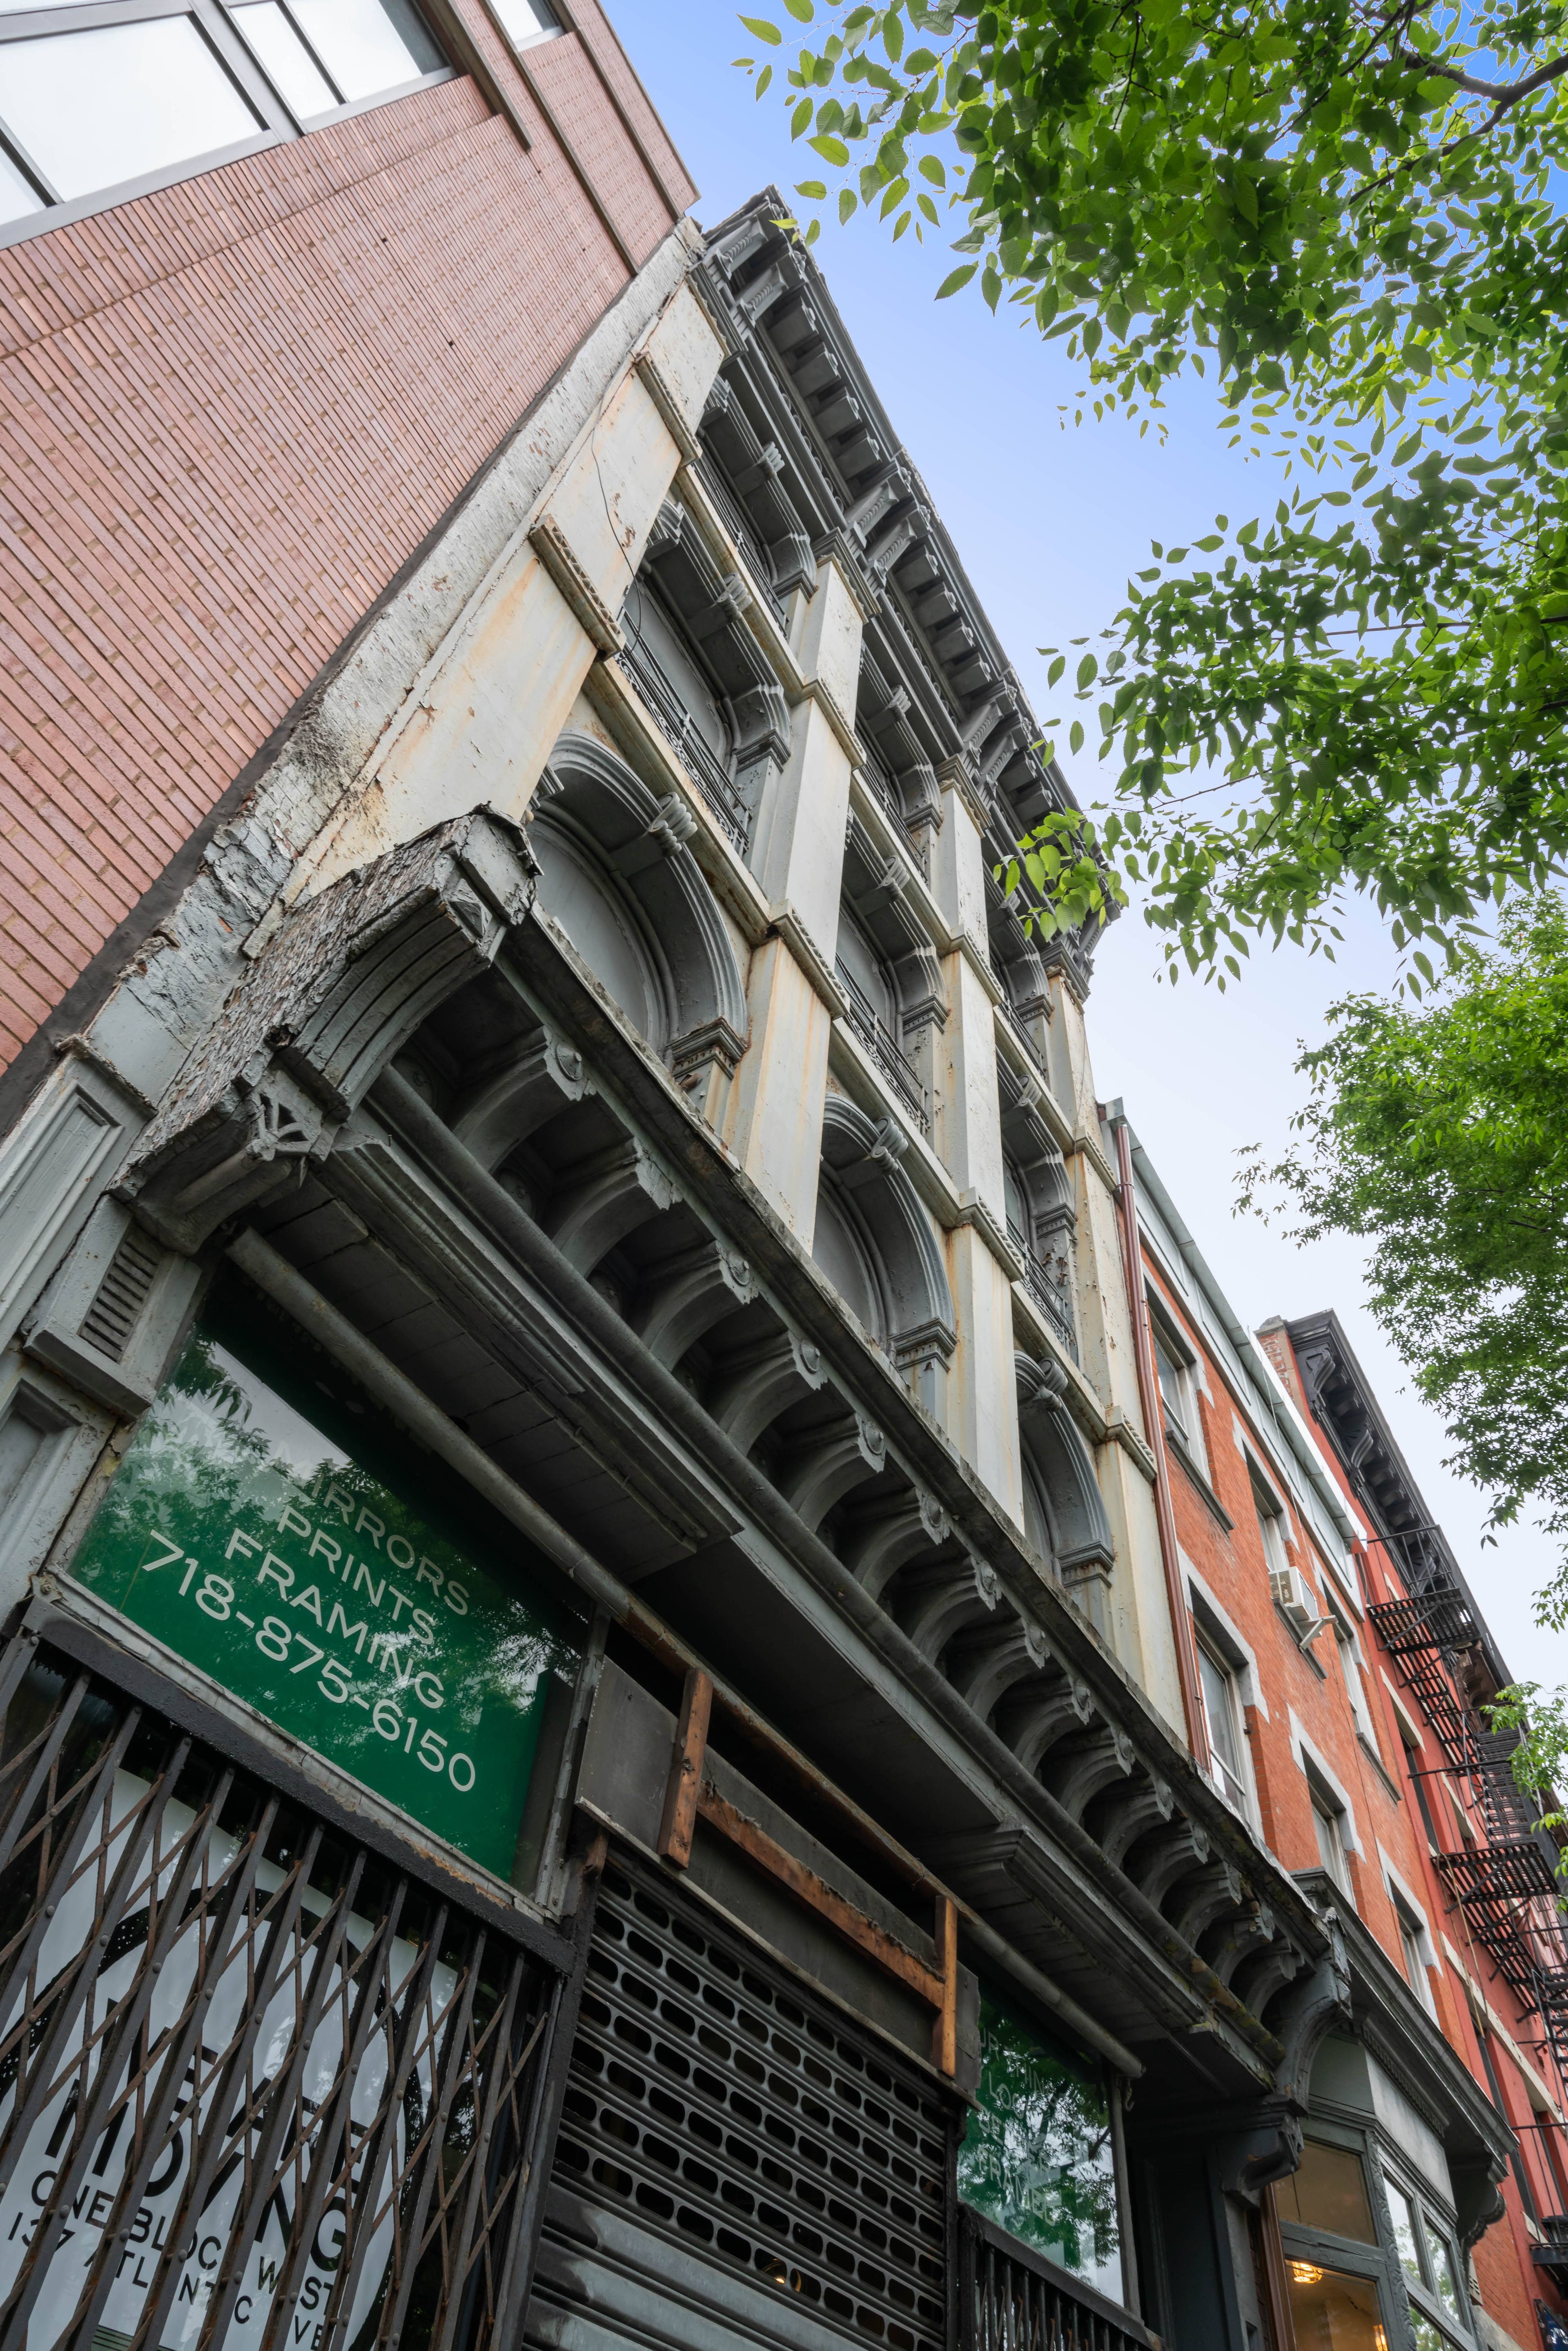 ComingSoon ! With great bones and an outstanding location, you won't want to miss this historic mixed use building in prime Cobble Hill, featuring three floor through residential units and ...